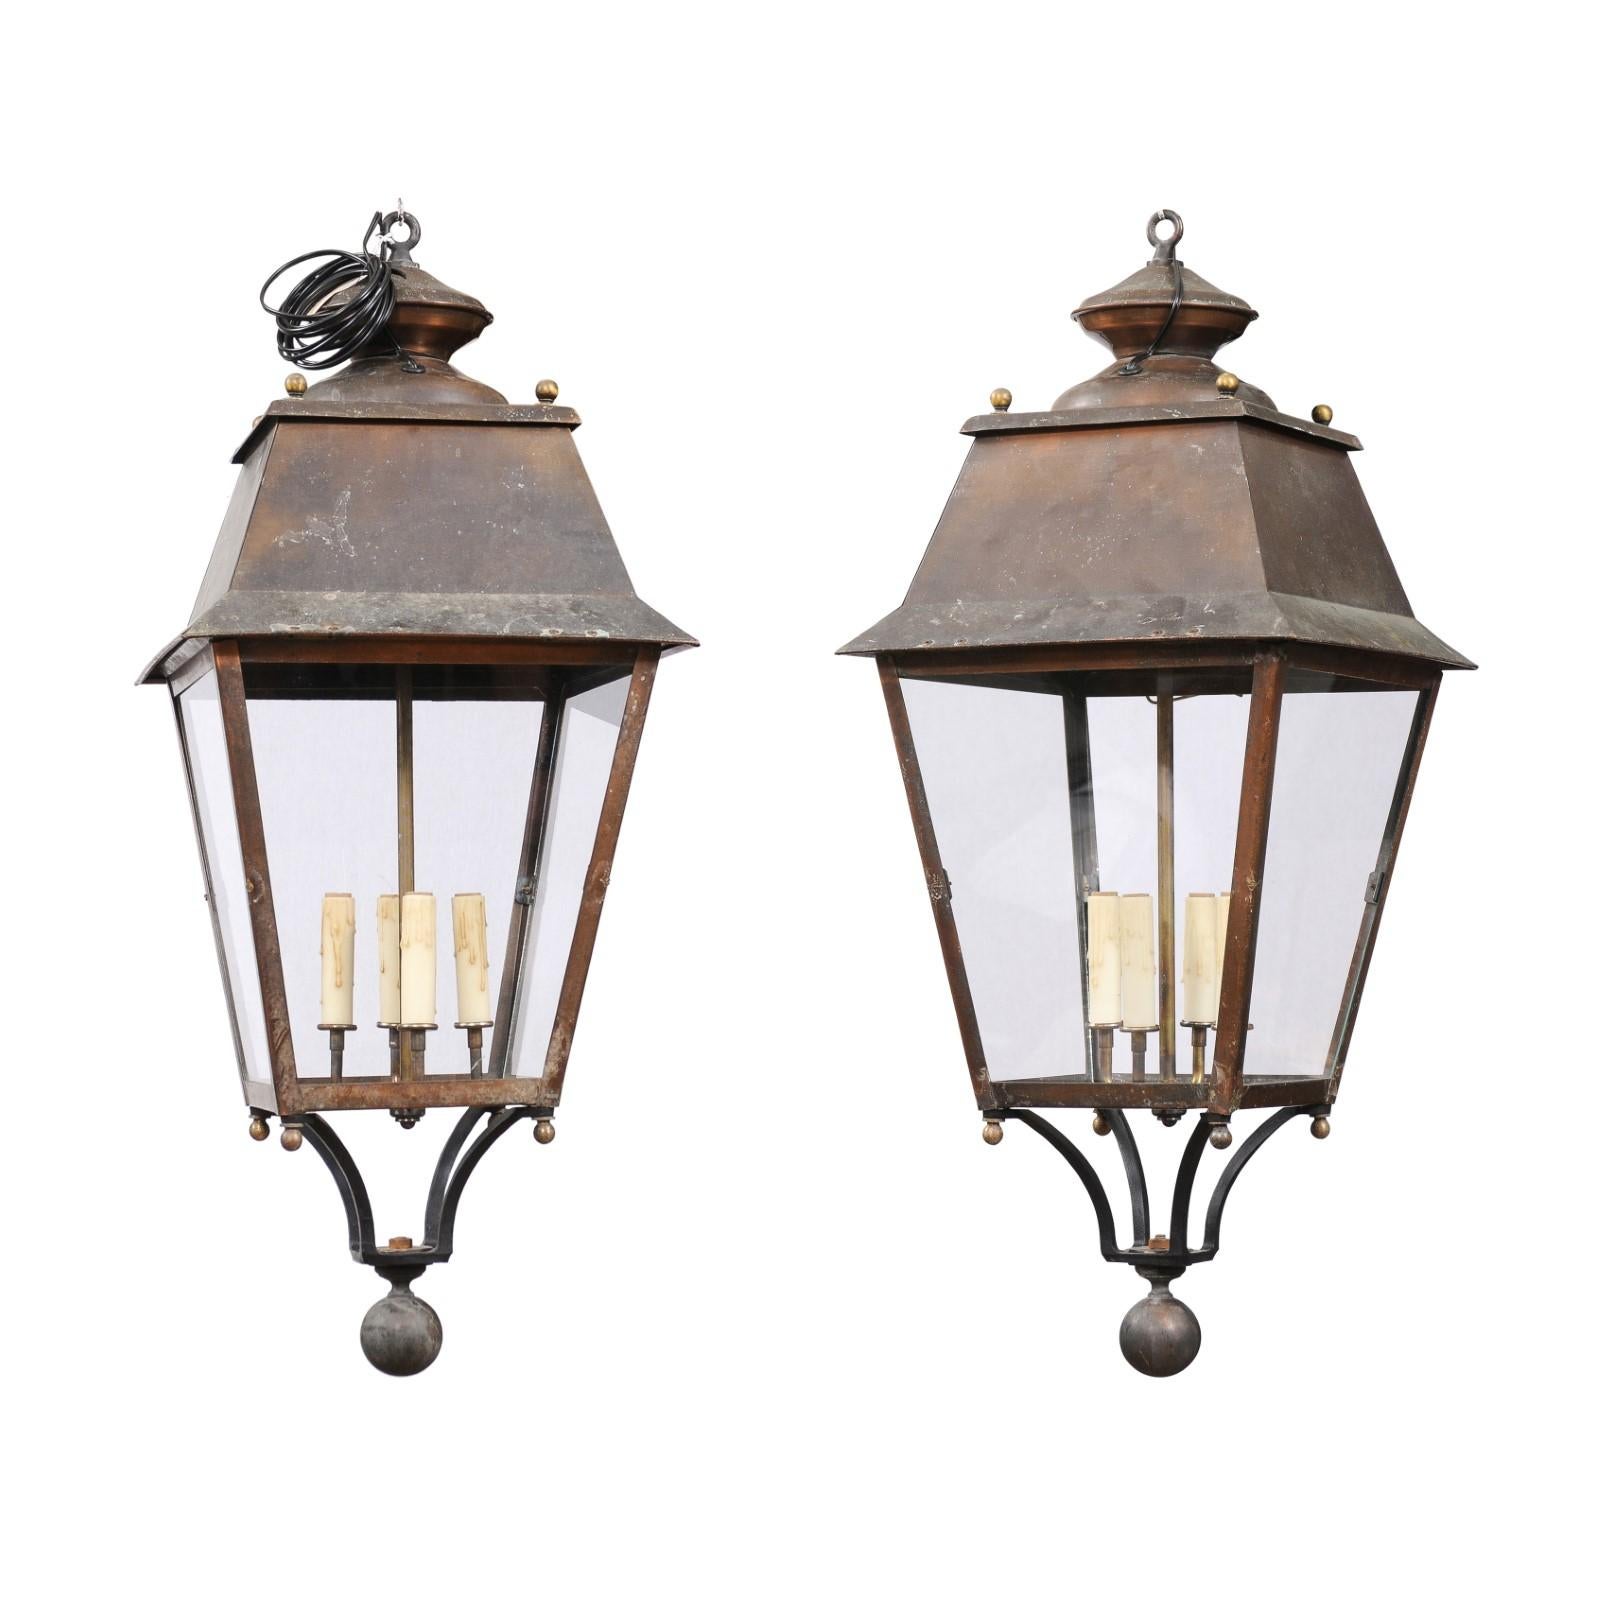 Two French copper lanterns from the 20th century, with four lights, glass panels, petite finial and rustic character. Elevate your home's ambiance with these elegant French copper lanterns, dating back to the 20th century, each featuring a quartet